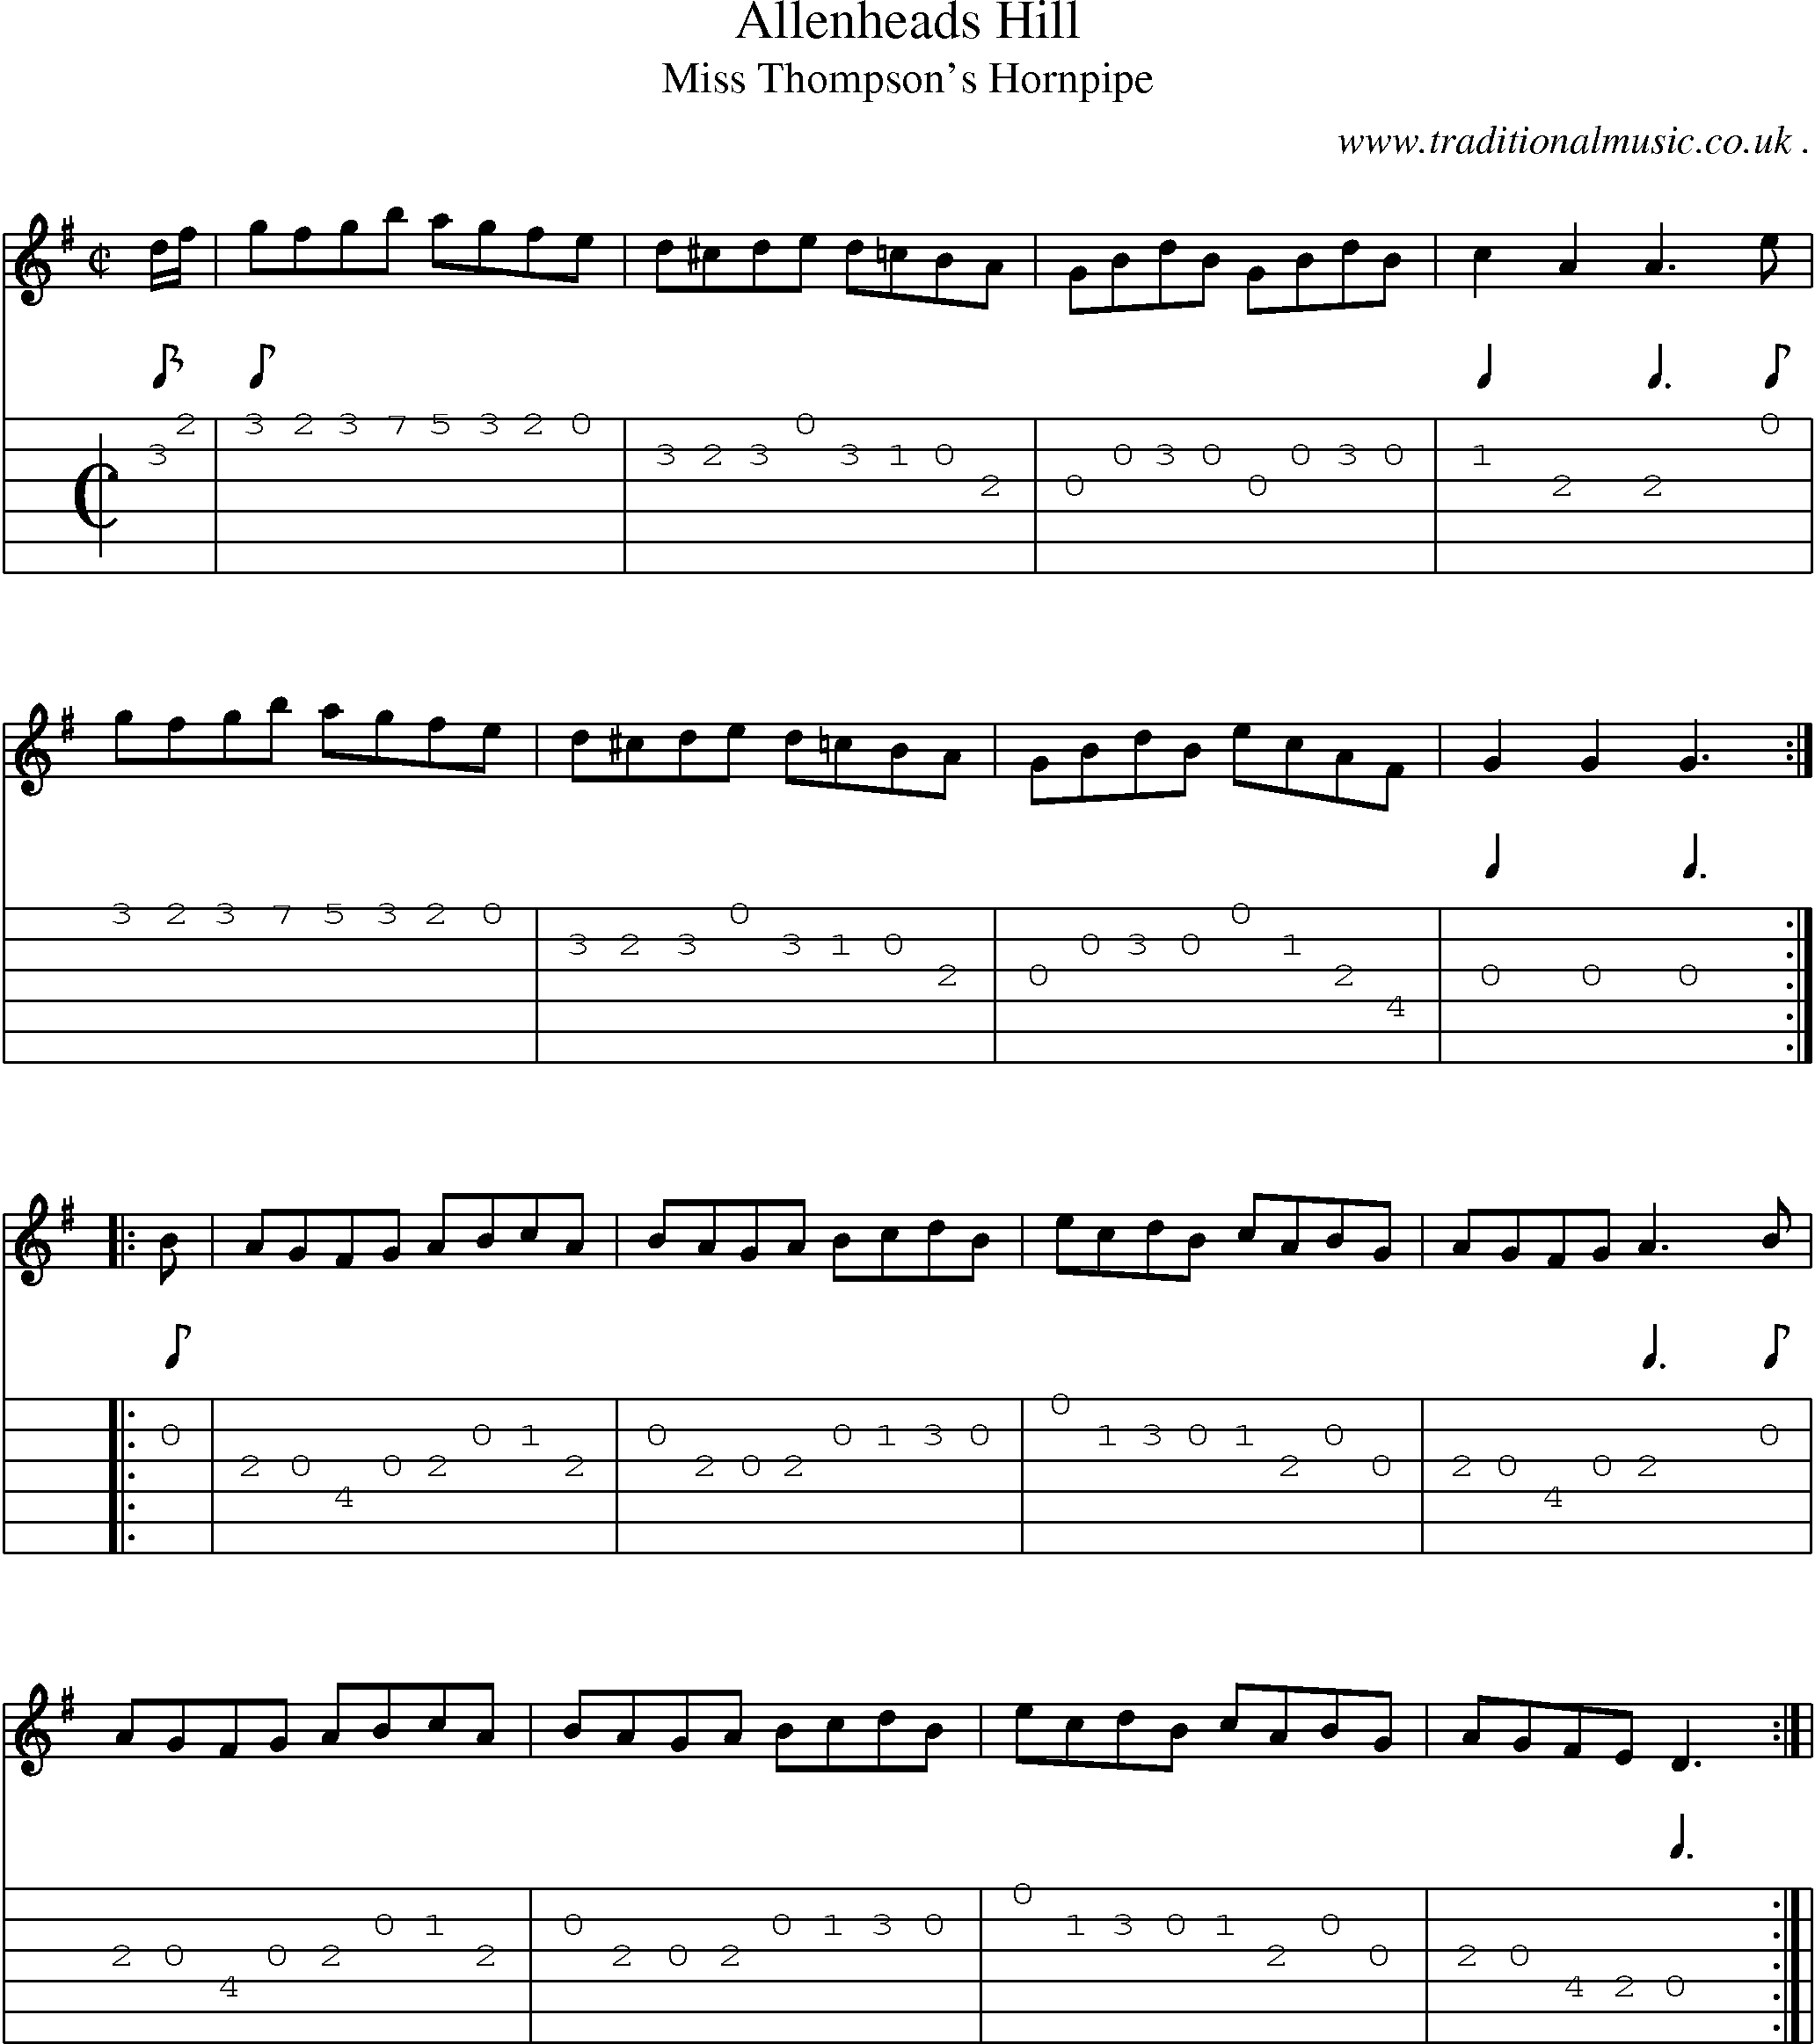 Sheet-Music and Guitar Tabs for Allenheads Hill